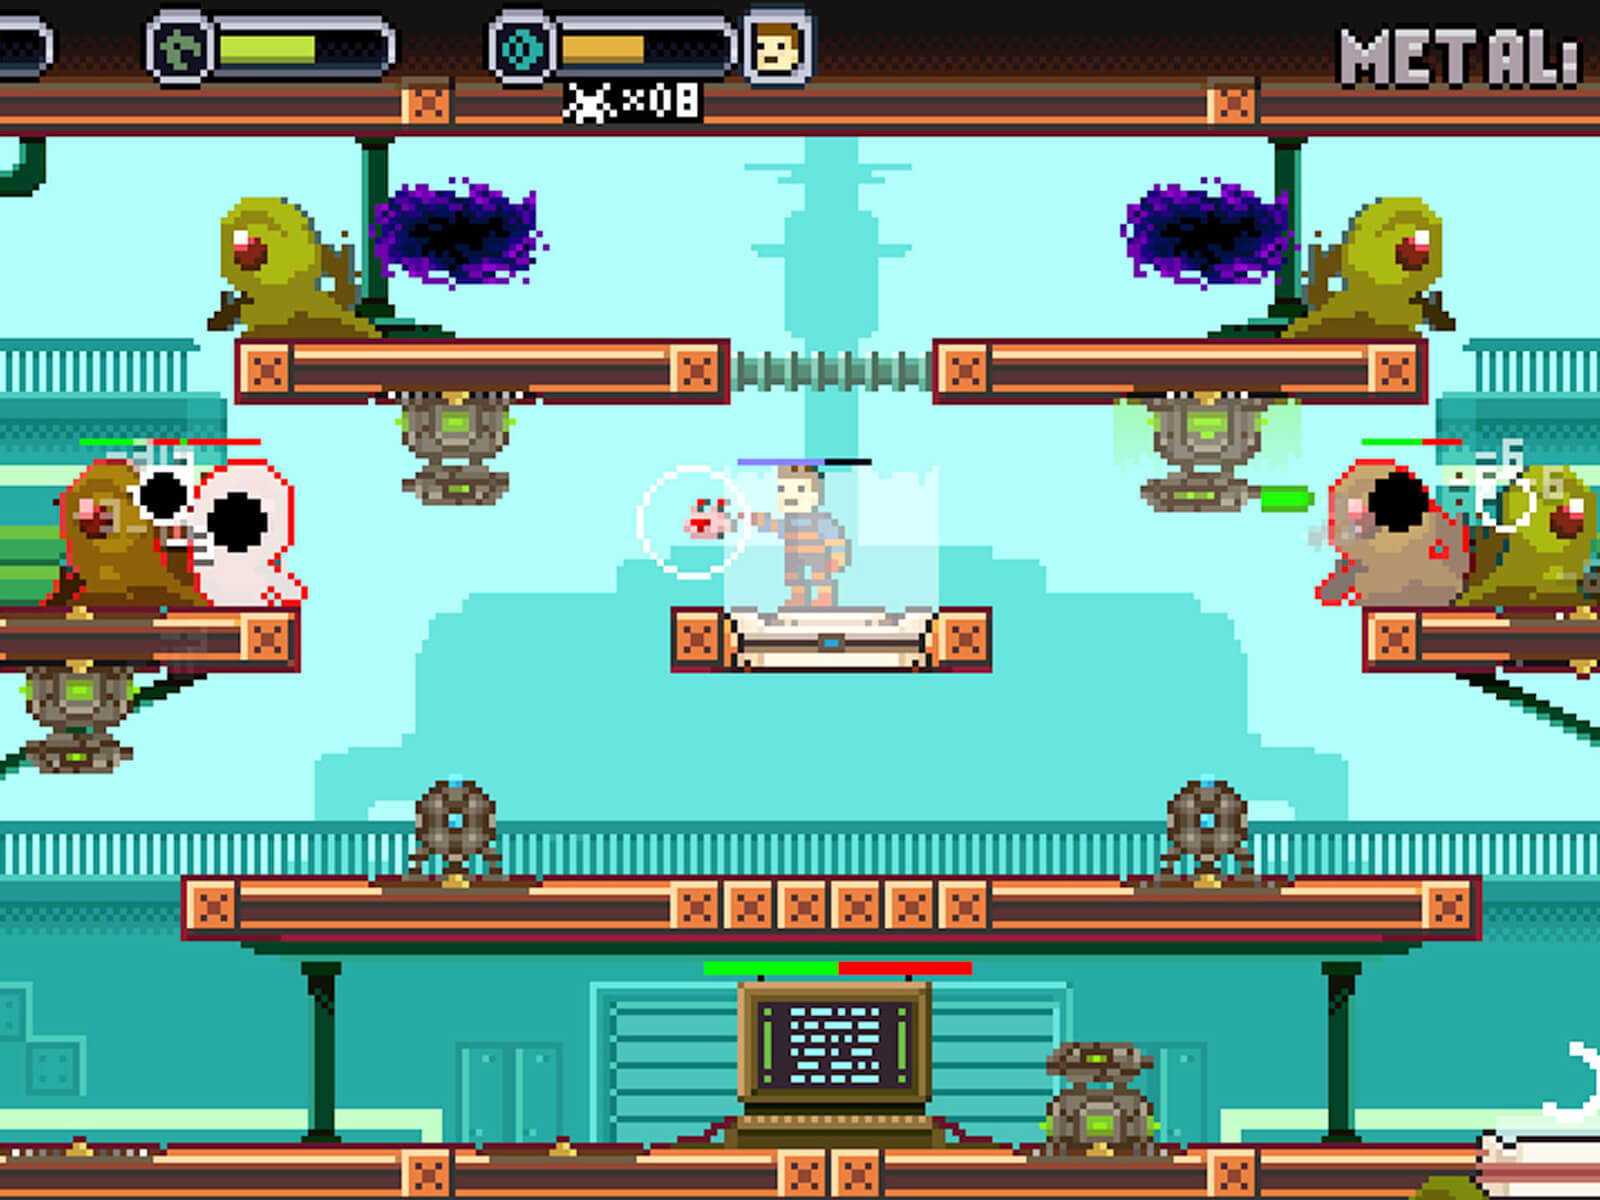 Screenshot of Spacejacked; a 2D character stands on a central platform surrounded by green aliens